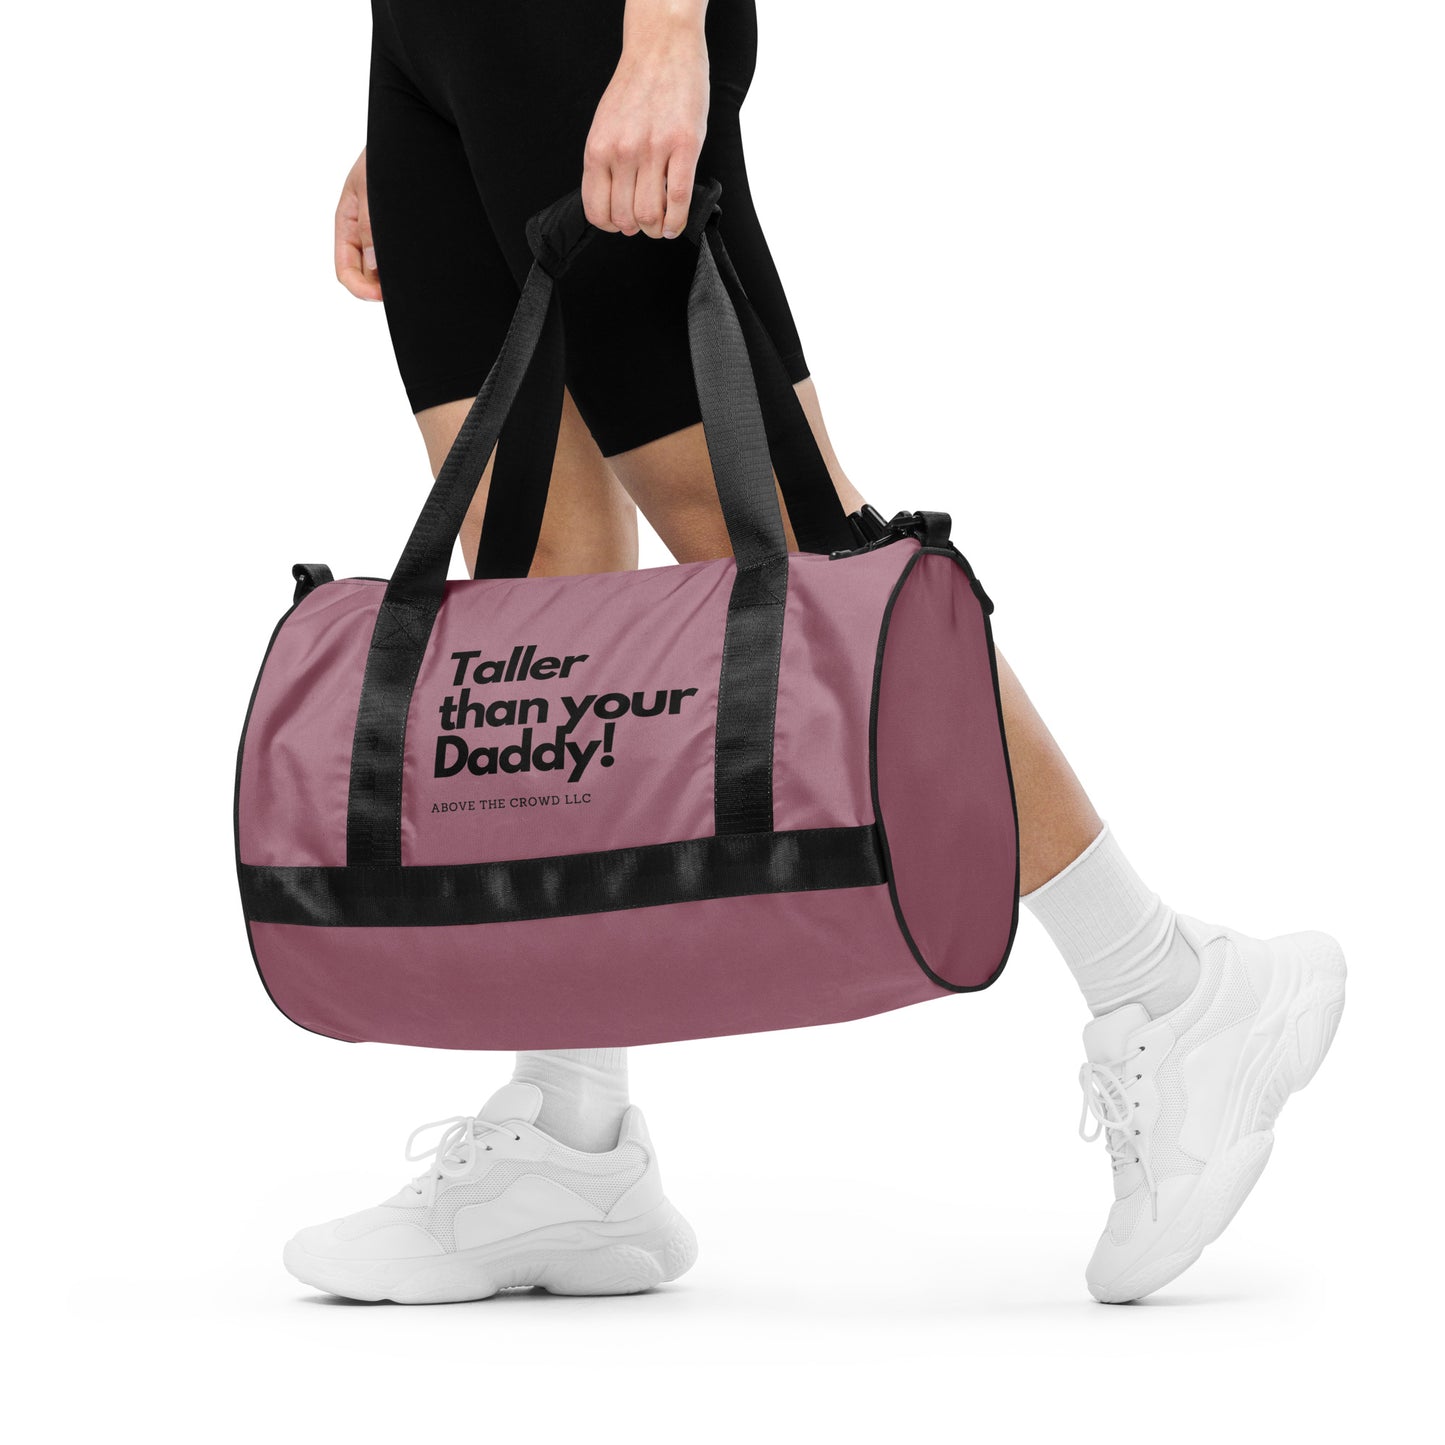 Dusty Rose 'Taller than your Daddy!' Gym Bag